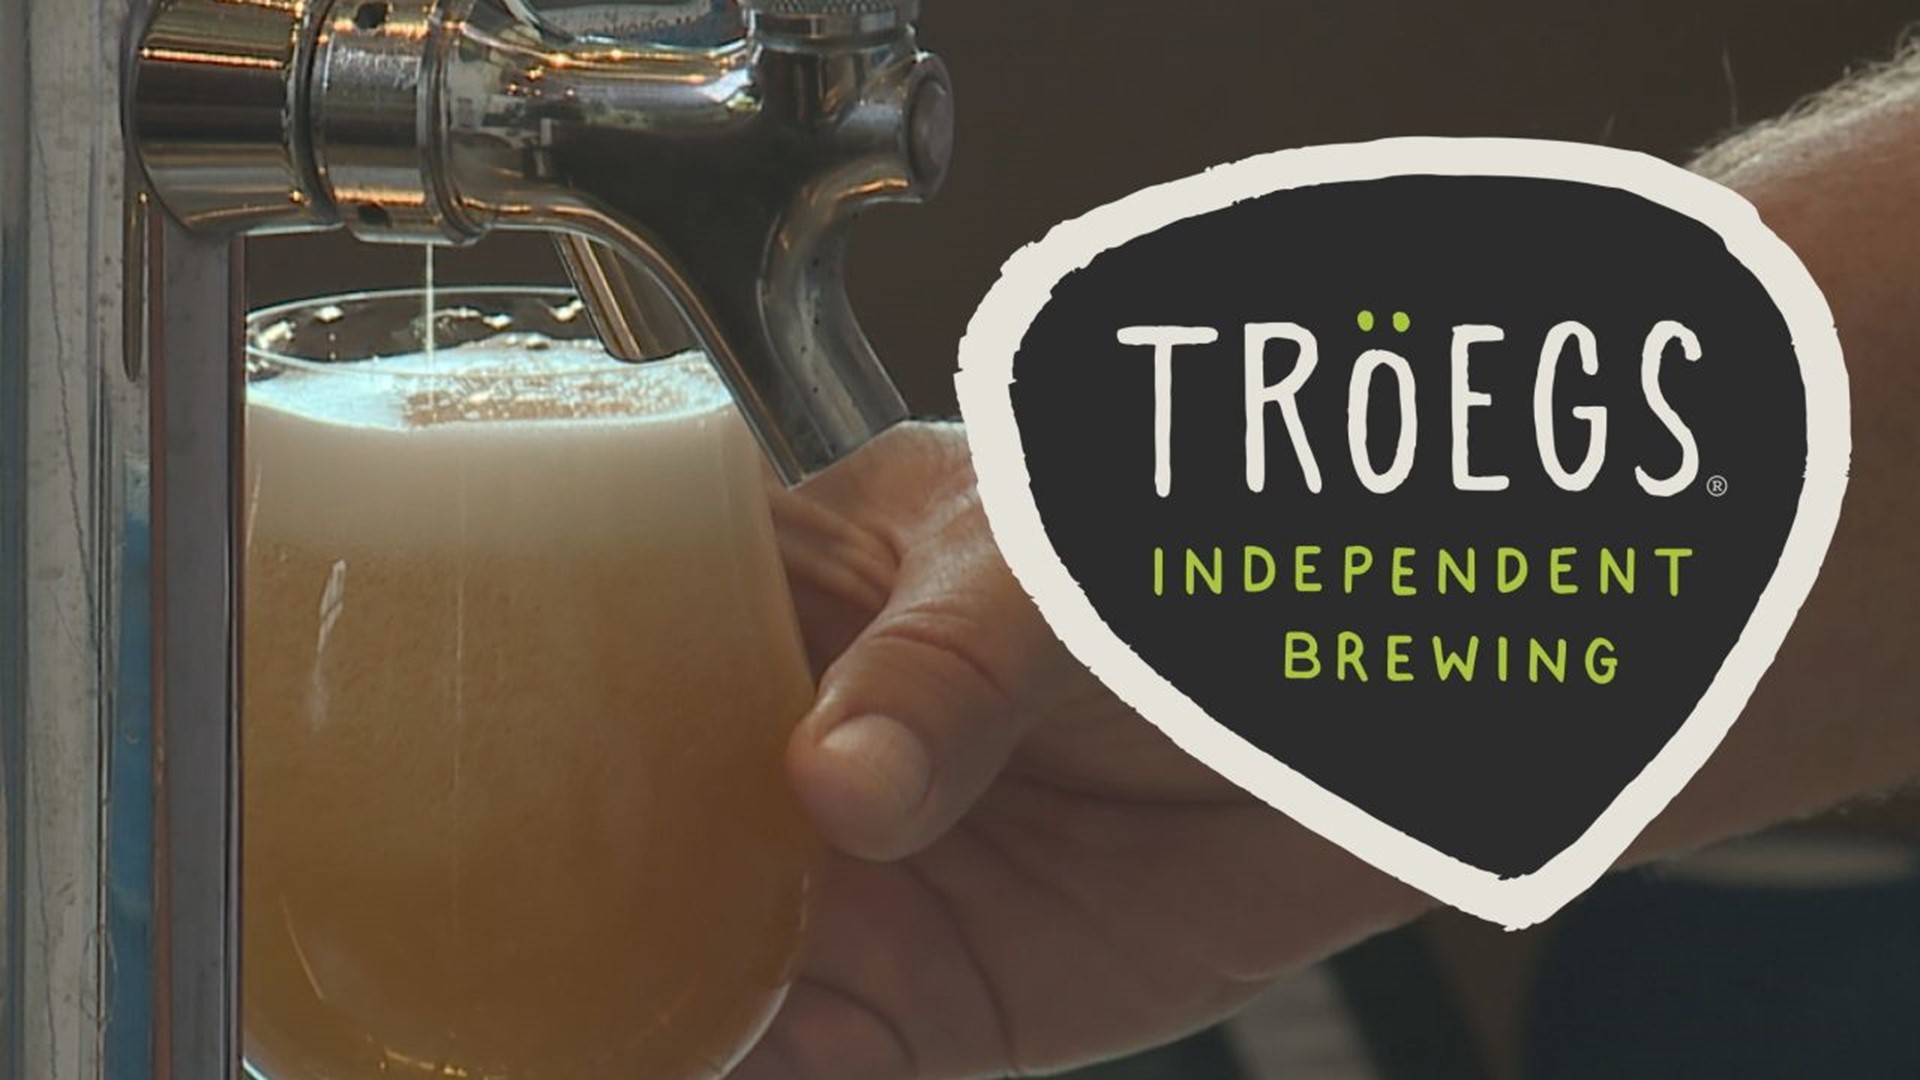 For the third straight year, USA Today readers have voted Troegs as having the best brewery tour in the country.